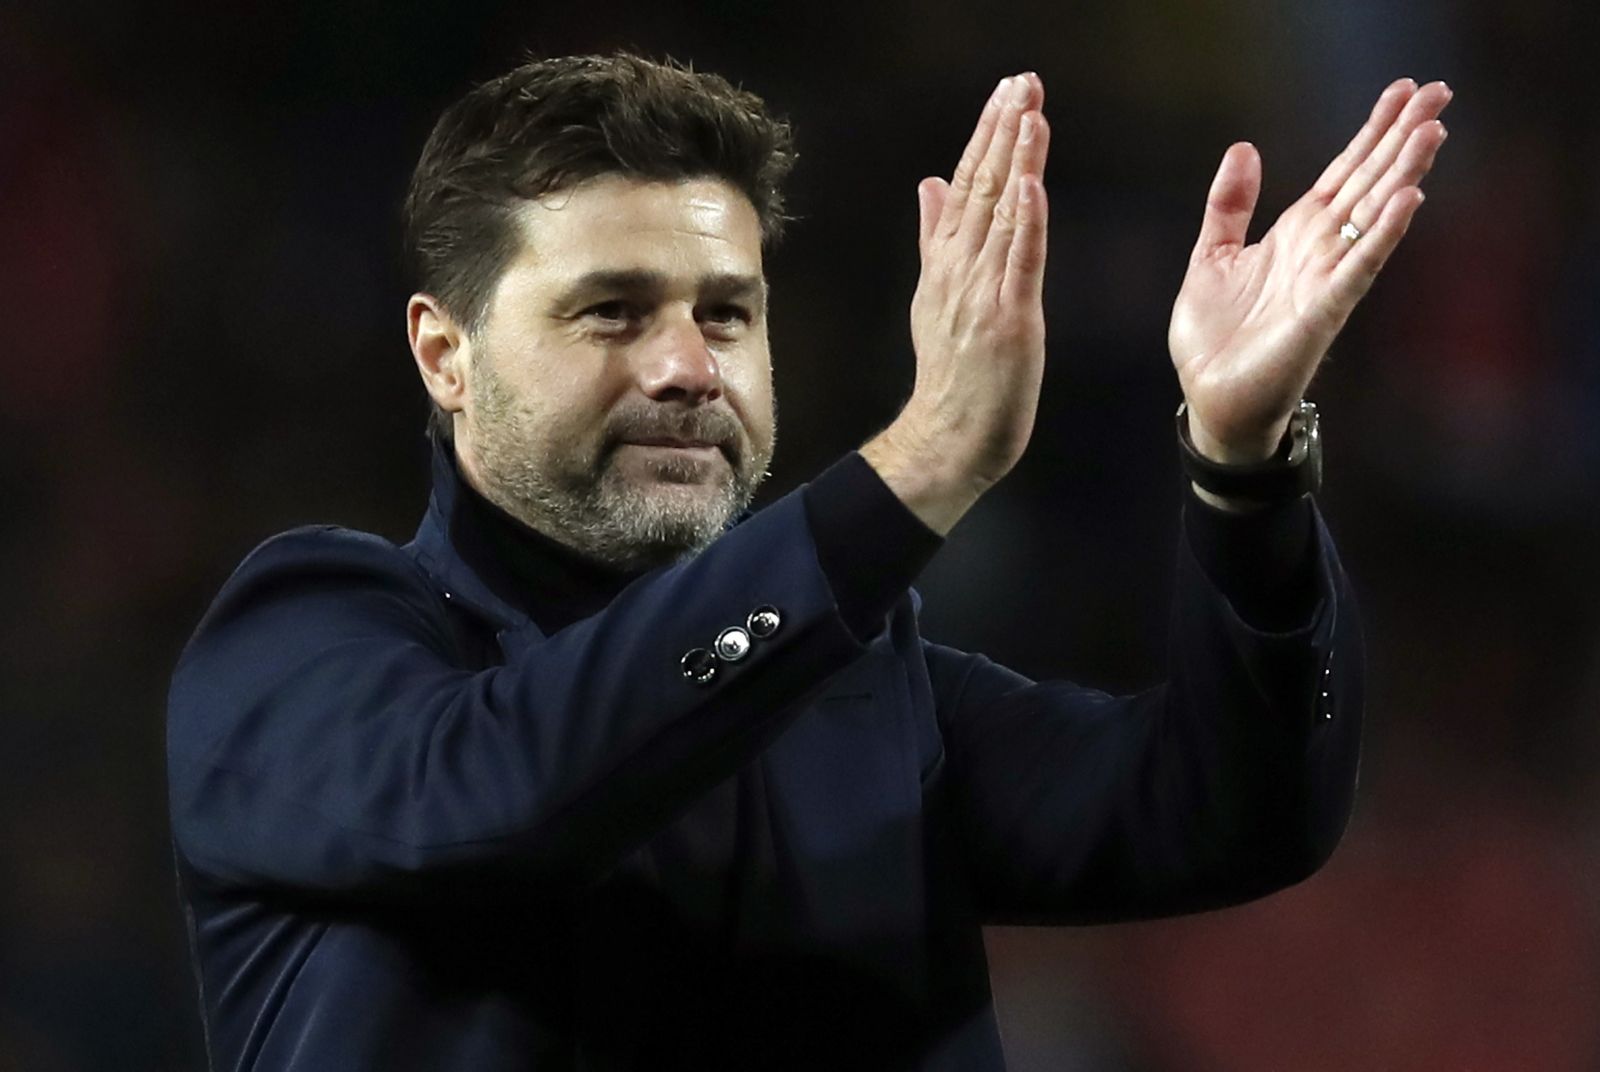 FILE - Mauricio Pochettino applauds fans after the Champions League group B soccer match between Red Star and Tottenham, at the Rajko Mitic Stadium in Belgrade, Serbia, Wednesday, Nov. 6, 2019. Chelsea has hired Mauricio Pochettino as manager on a two-year deal with the option of another year. The Argentine coach is tasked with getting the best out of an expensively assembled squad that has underperformed at the start of a new era for the English club. (AP Photo/Darko Vojinovic, File)